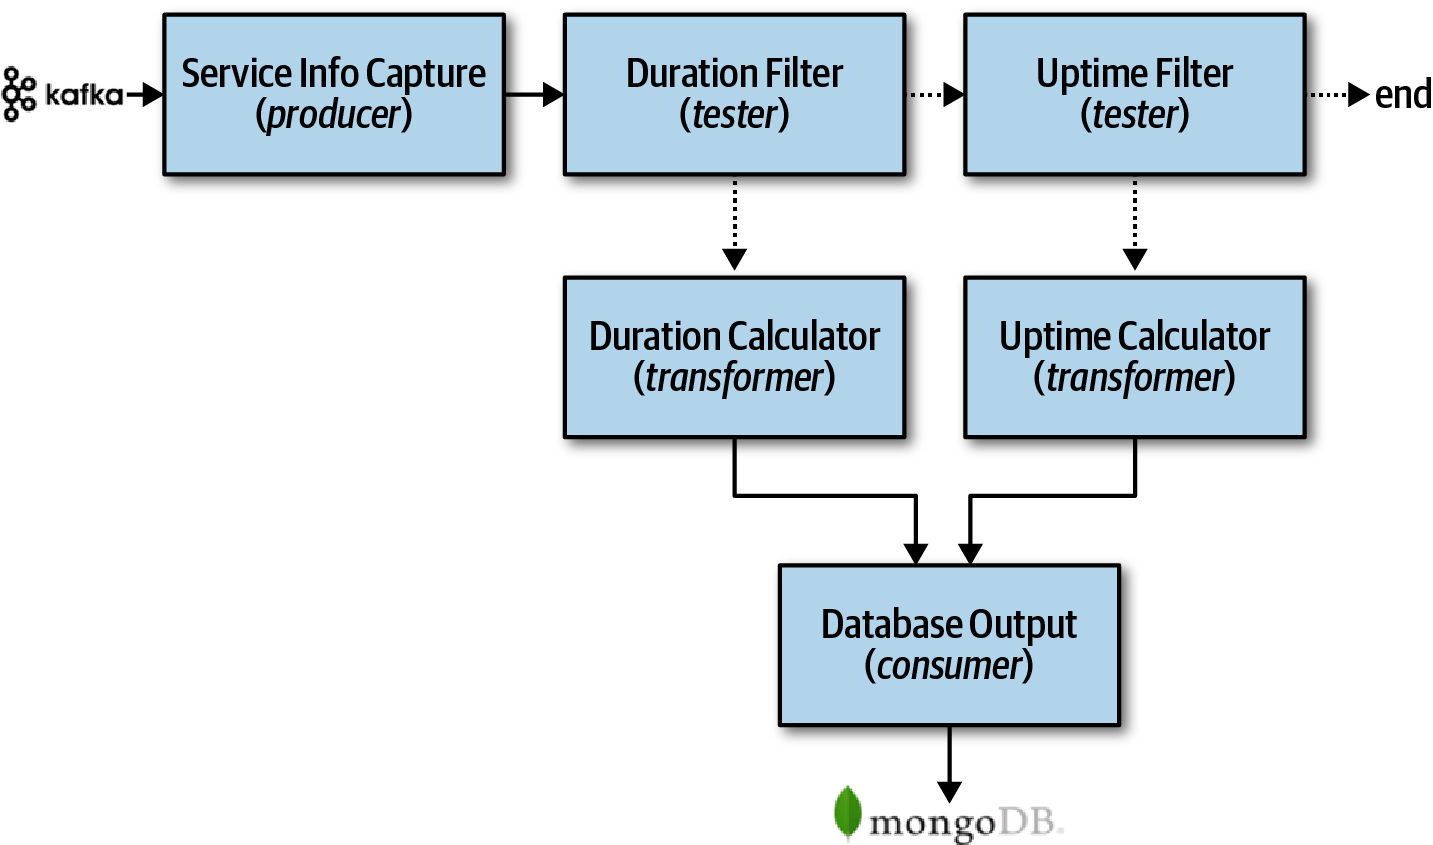 Pipeline architecture example from Fundamentals of Software Architecture.